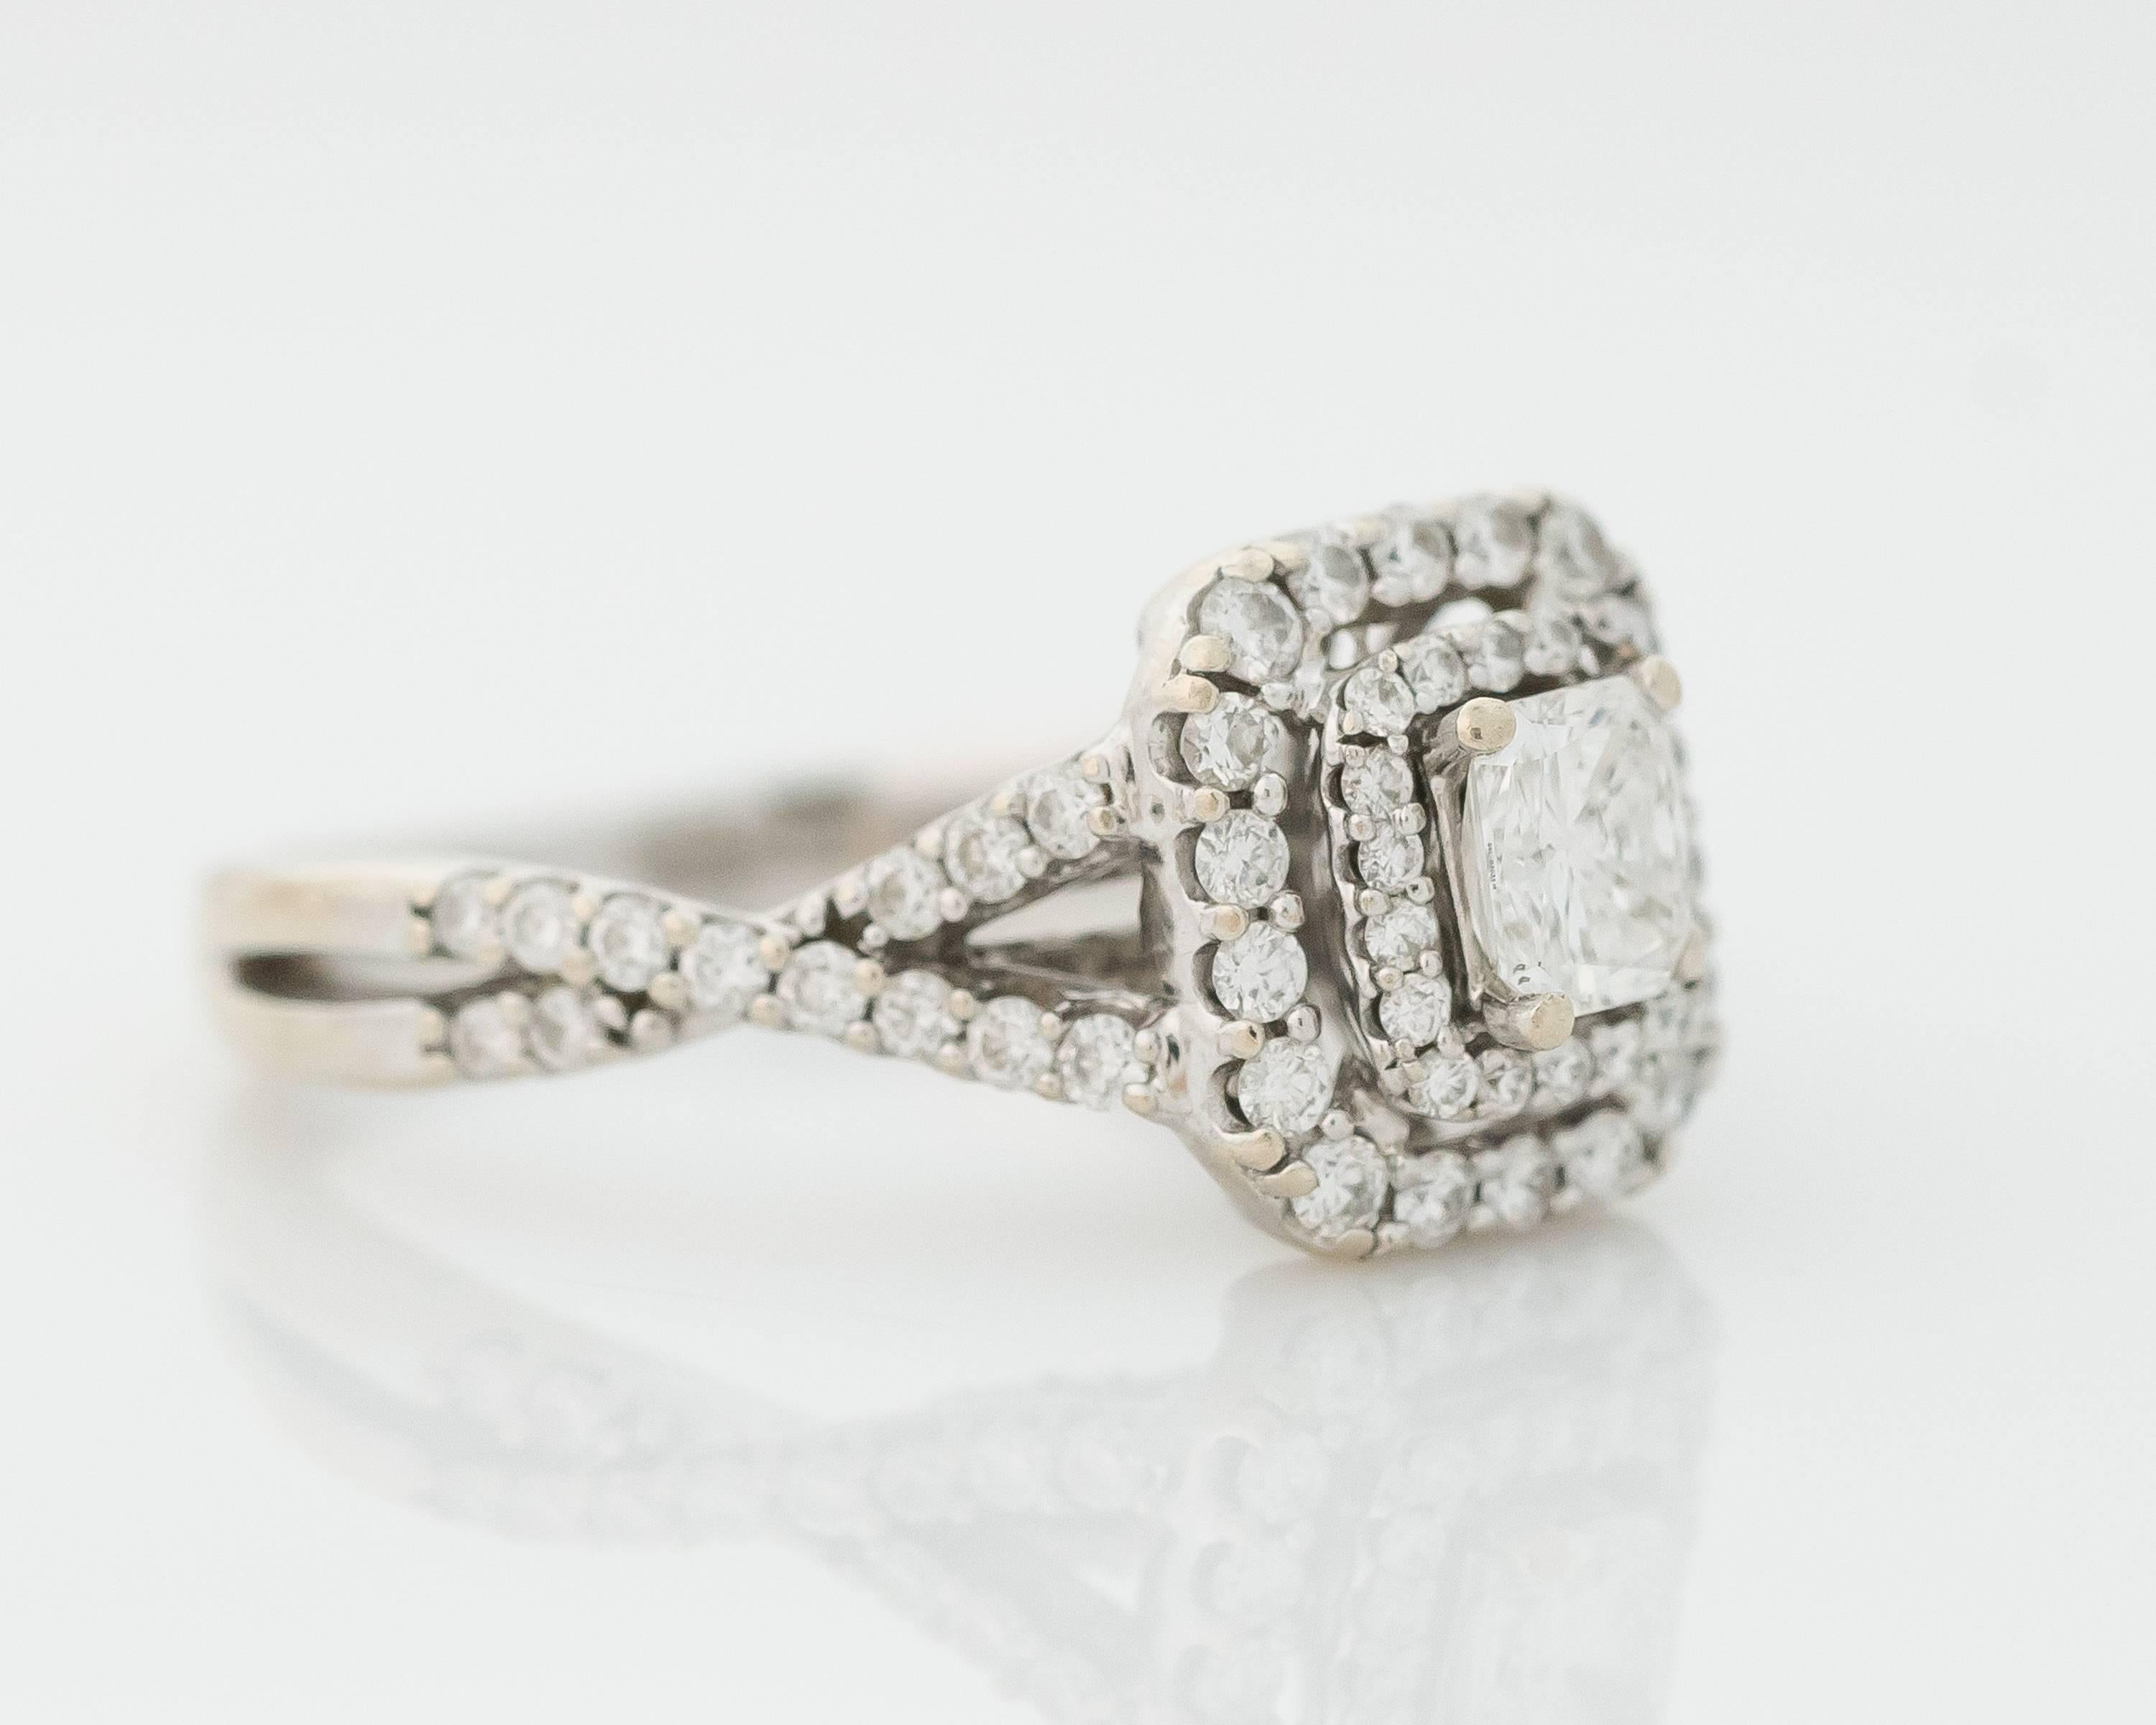  This stunning Diamond and 14 Karat White Gold Engagement Ring features 1 carat total weight of diamonds and a Double Halo cathedral setting. Diamonds Everywhere! 
The criss-cross split shank has a smooth back half for wearing comfort while the